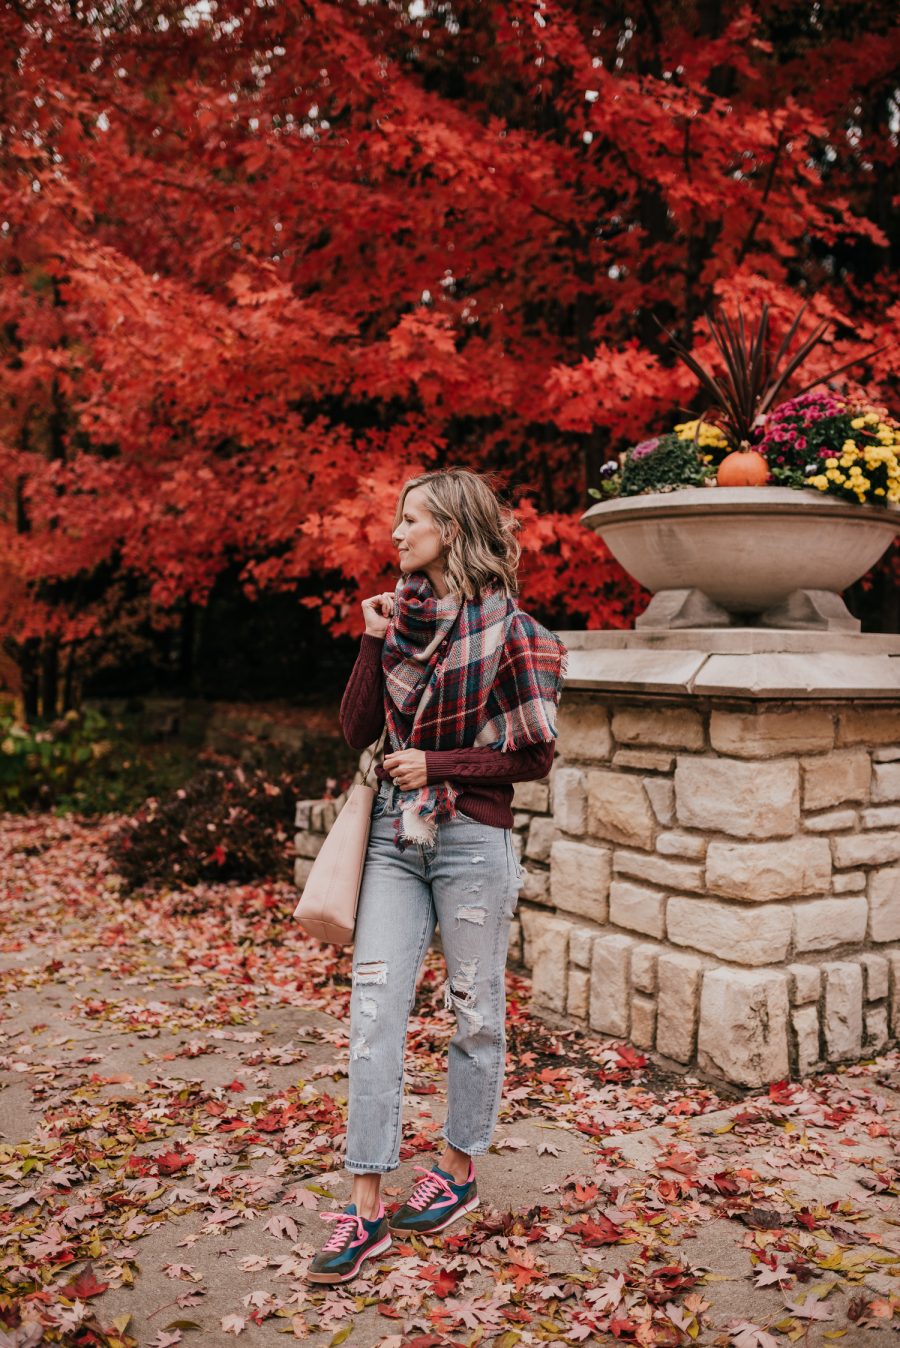 Thanksgiving Outfit Idea, cable knit sweater, plaid scarf, denim, sneakers, and tote bag